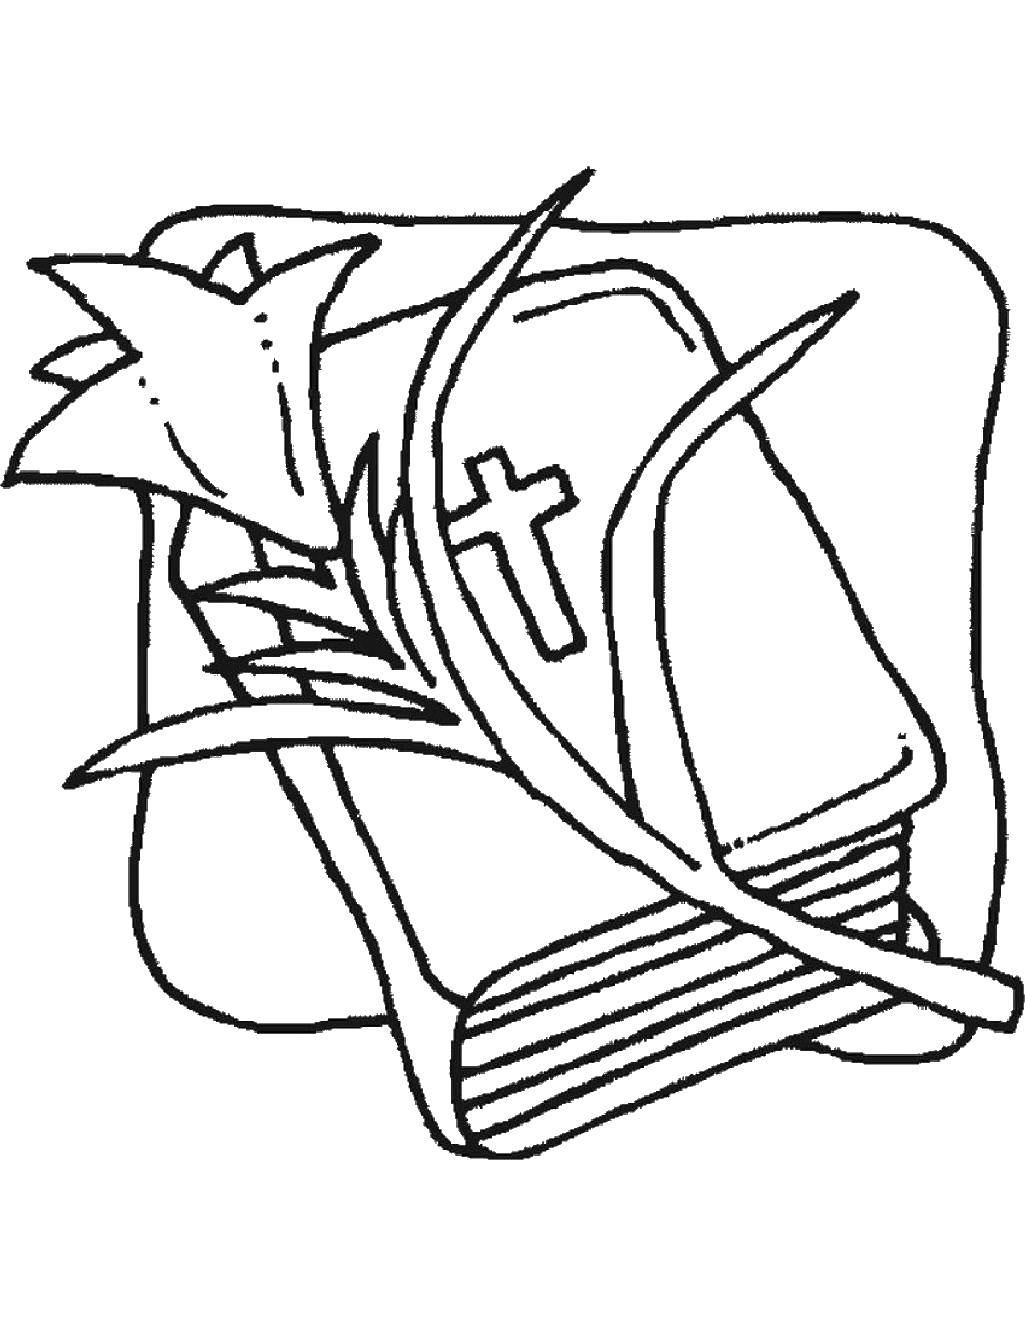 Coloring The cross on the Bible. Category coloring pages cross. Tags:  cross, Lily.